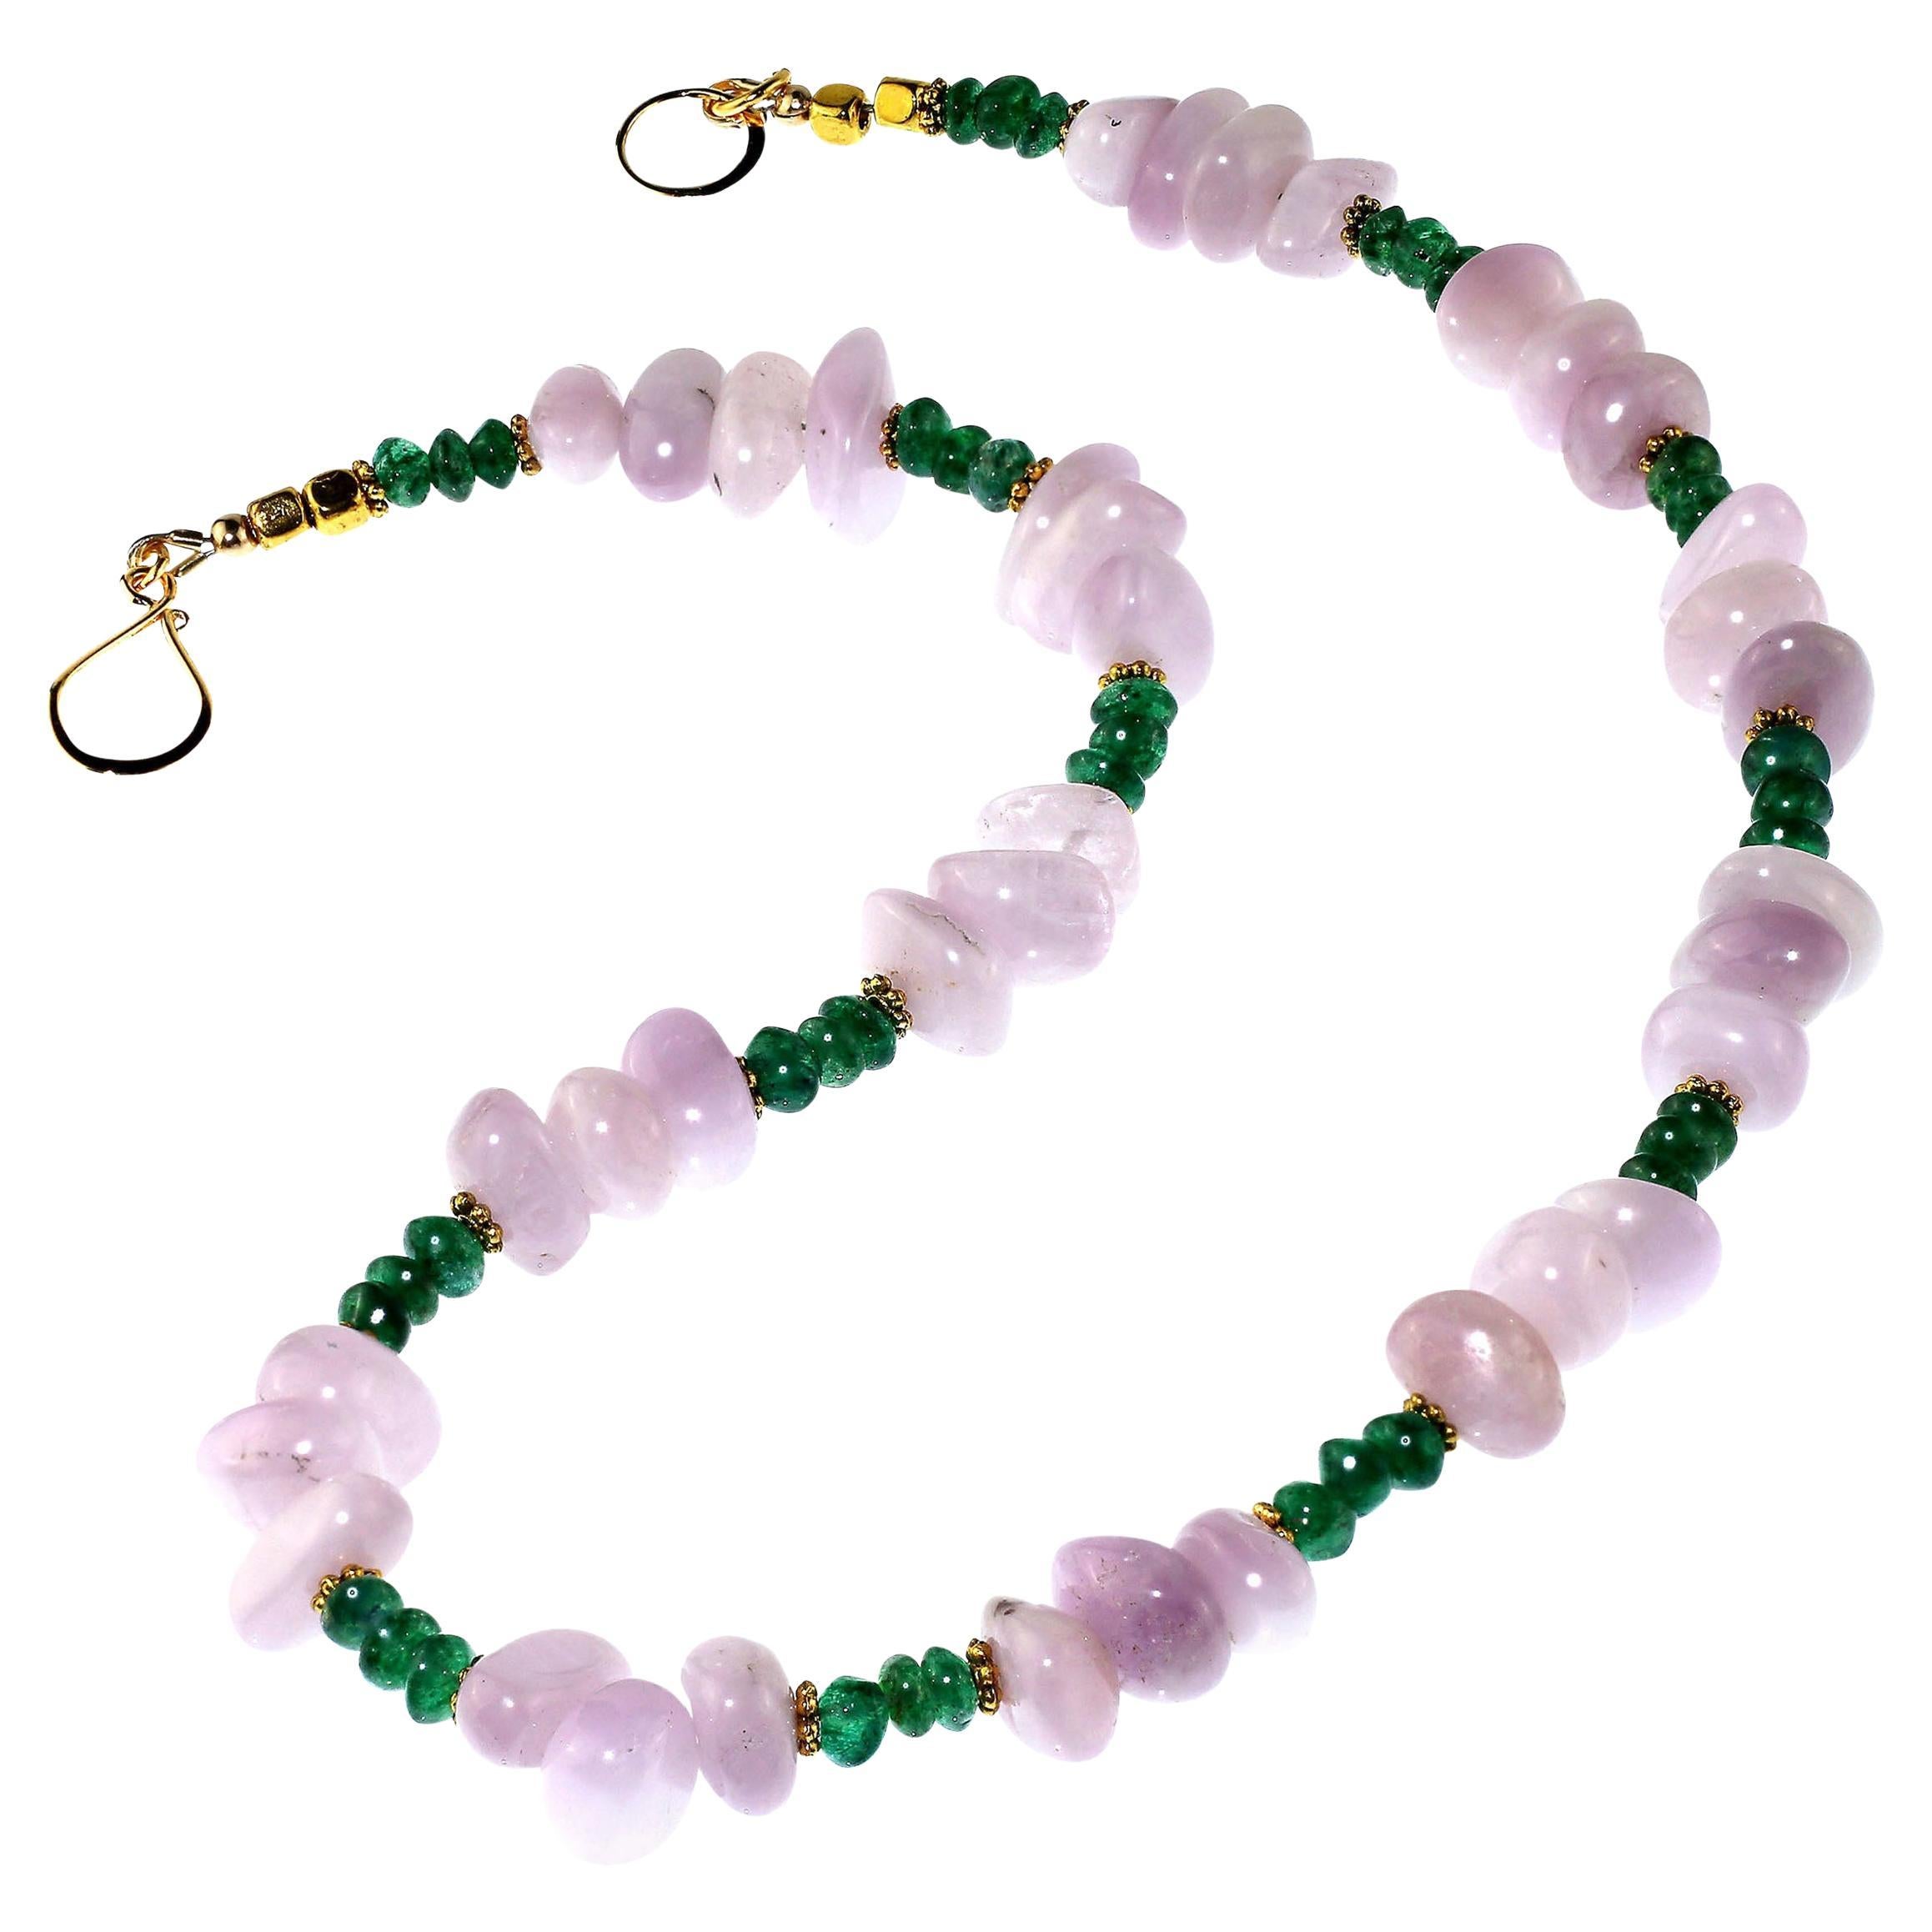 Bead AJD Glowing Kunzite and Aventurine Necklace for Summer Fun For Sale